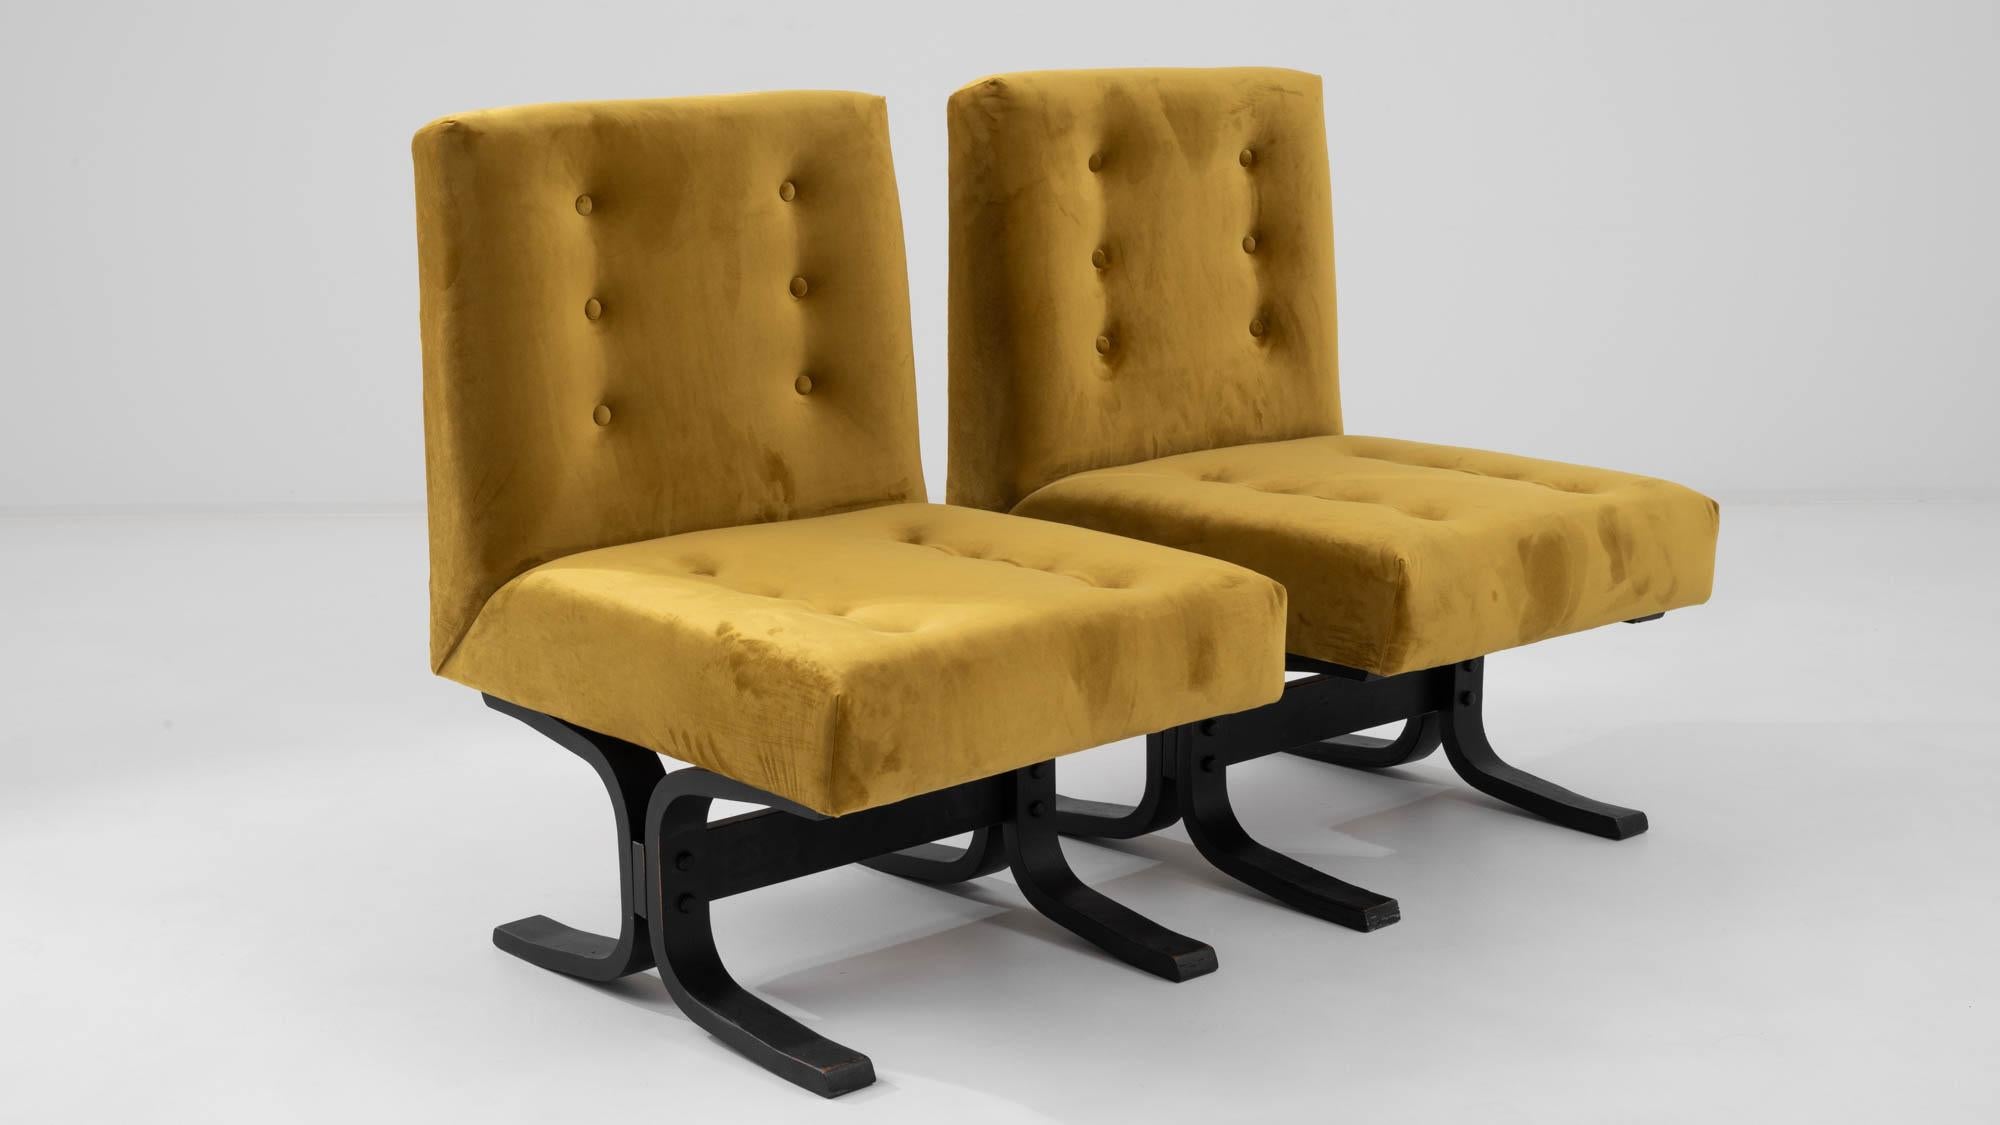 1960 Czechia Upholstered Chairs by Ludvik Volak, Set of 2 For Sale 5